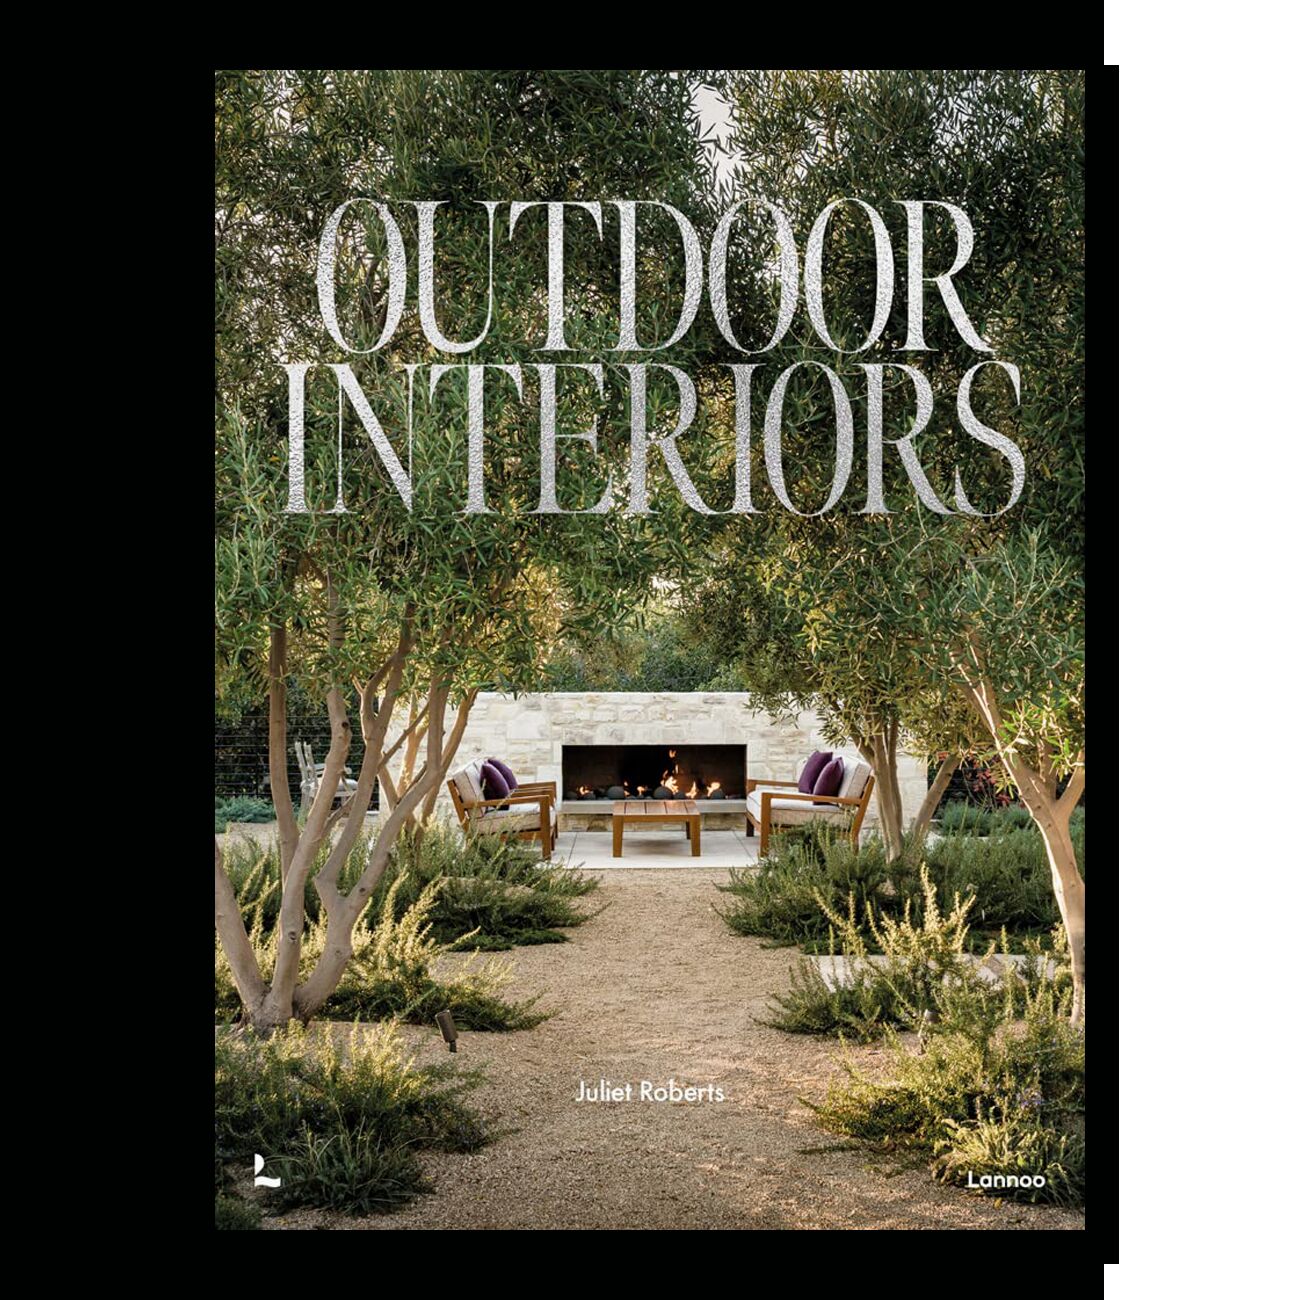 Outdoor Interiors: Bringing Style to Your Garden